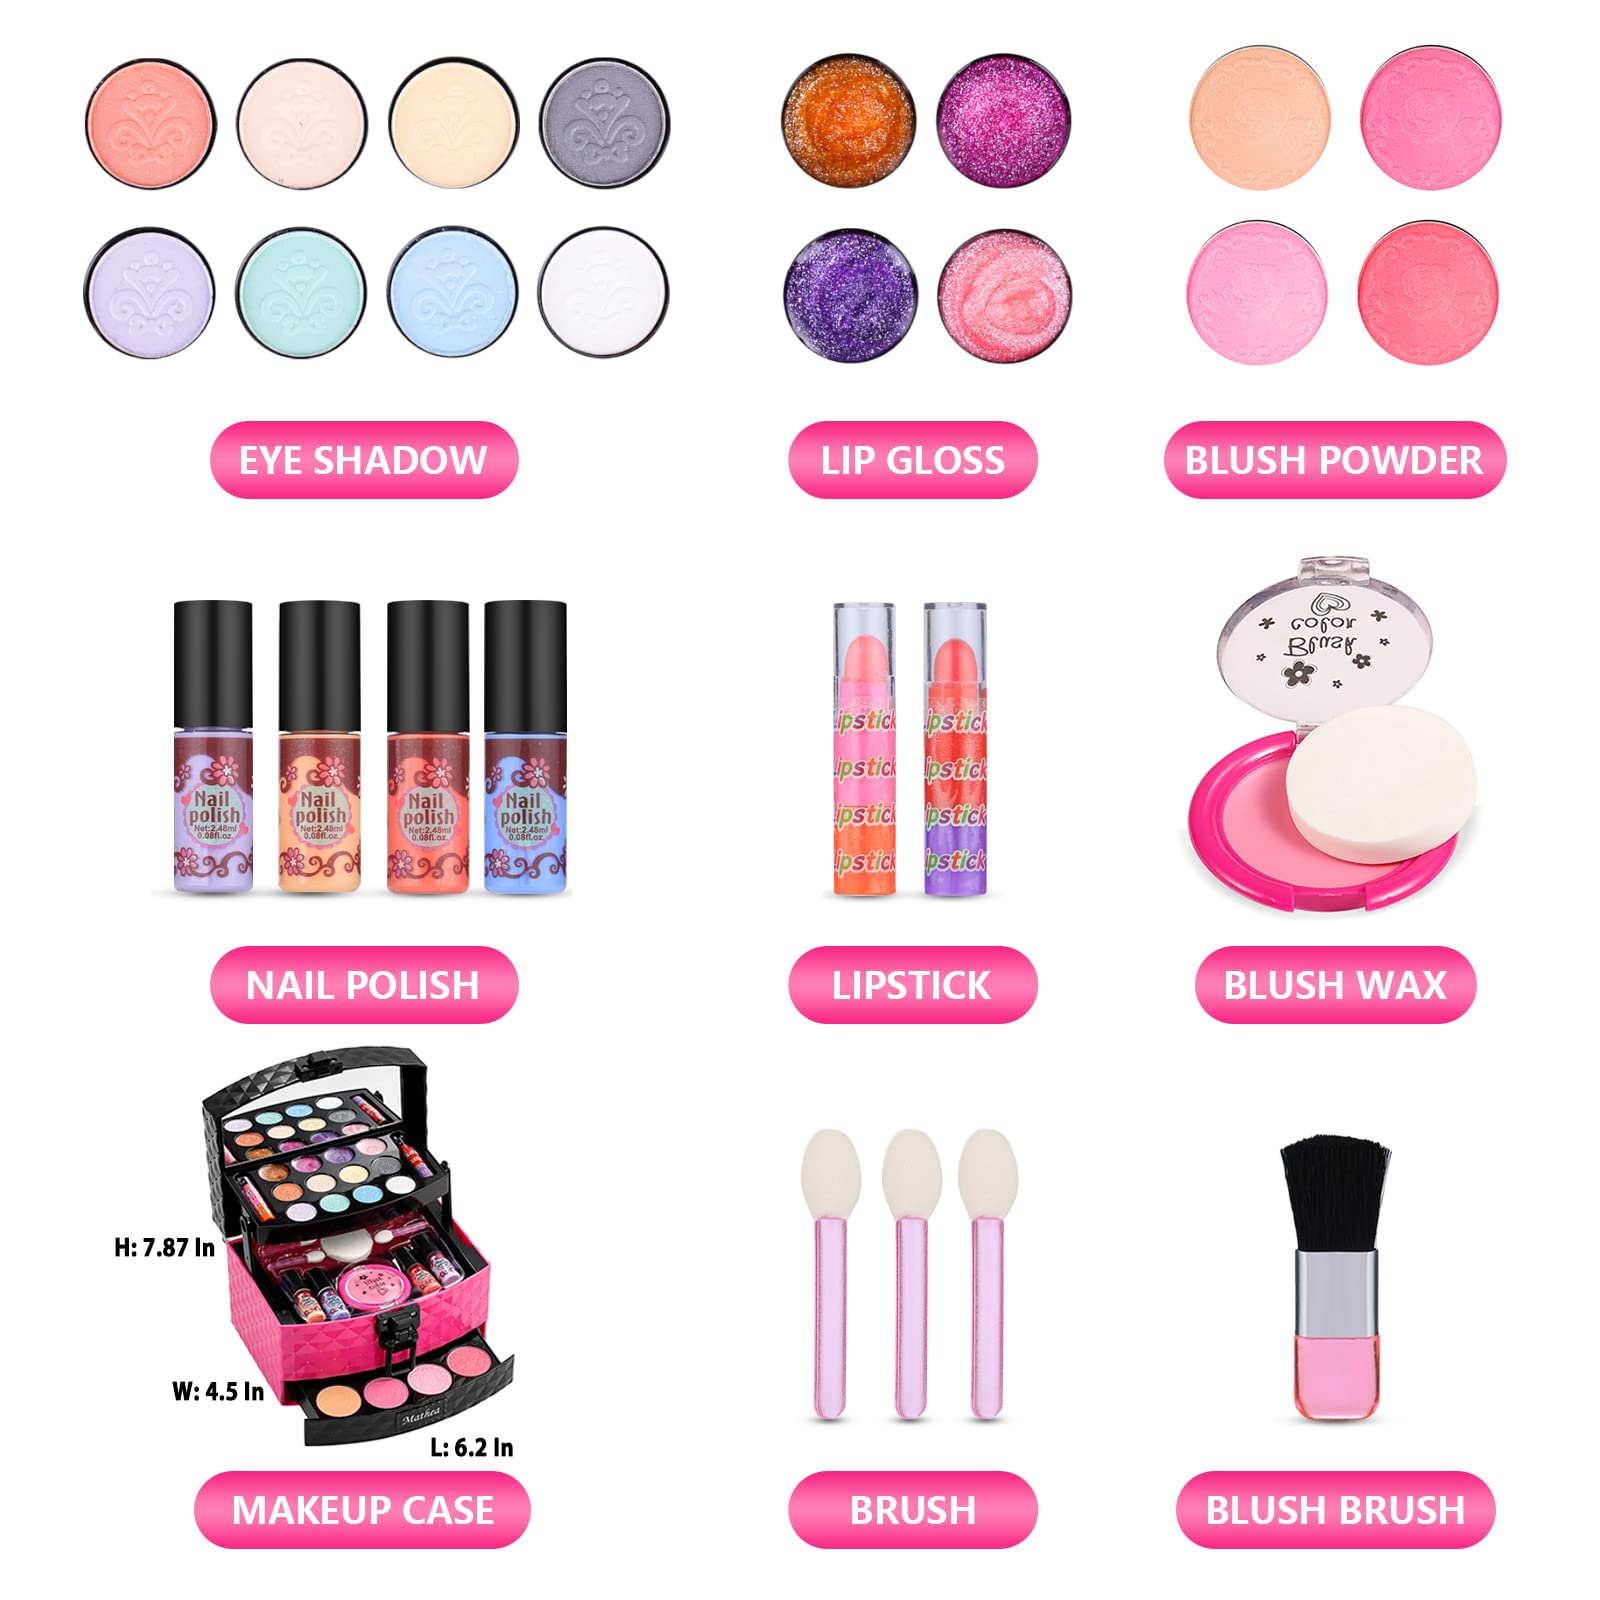 Mathea Kids Makeup Kit for Girls, Washable & Non-Toxic, Real Makeup Girl Toys, Makeup Set for Girls, Easy to Storage and Portable, Birthday Gift for Kids Age 3-12